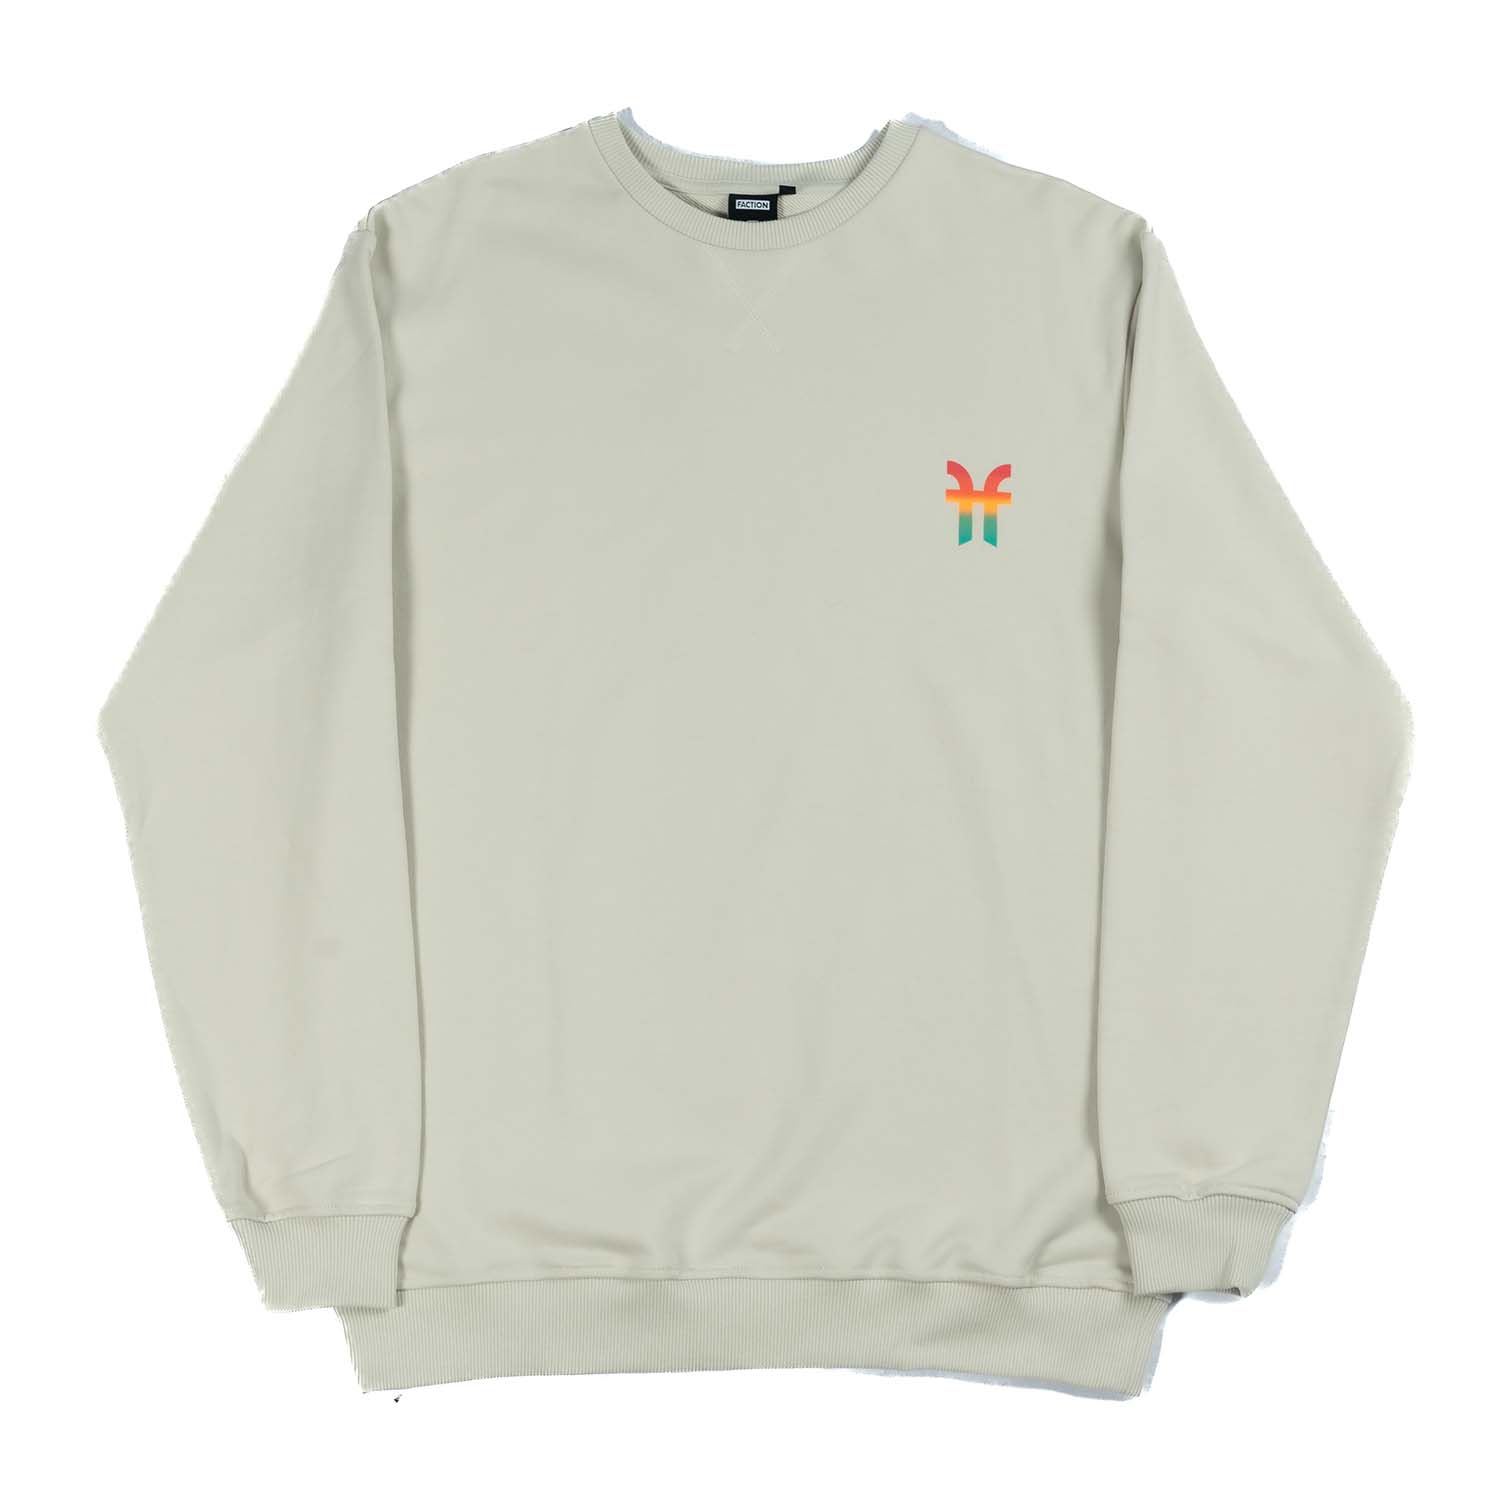 Faction Outcast Crew Neck Light Grey Flat Lay Front